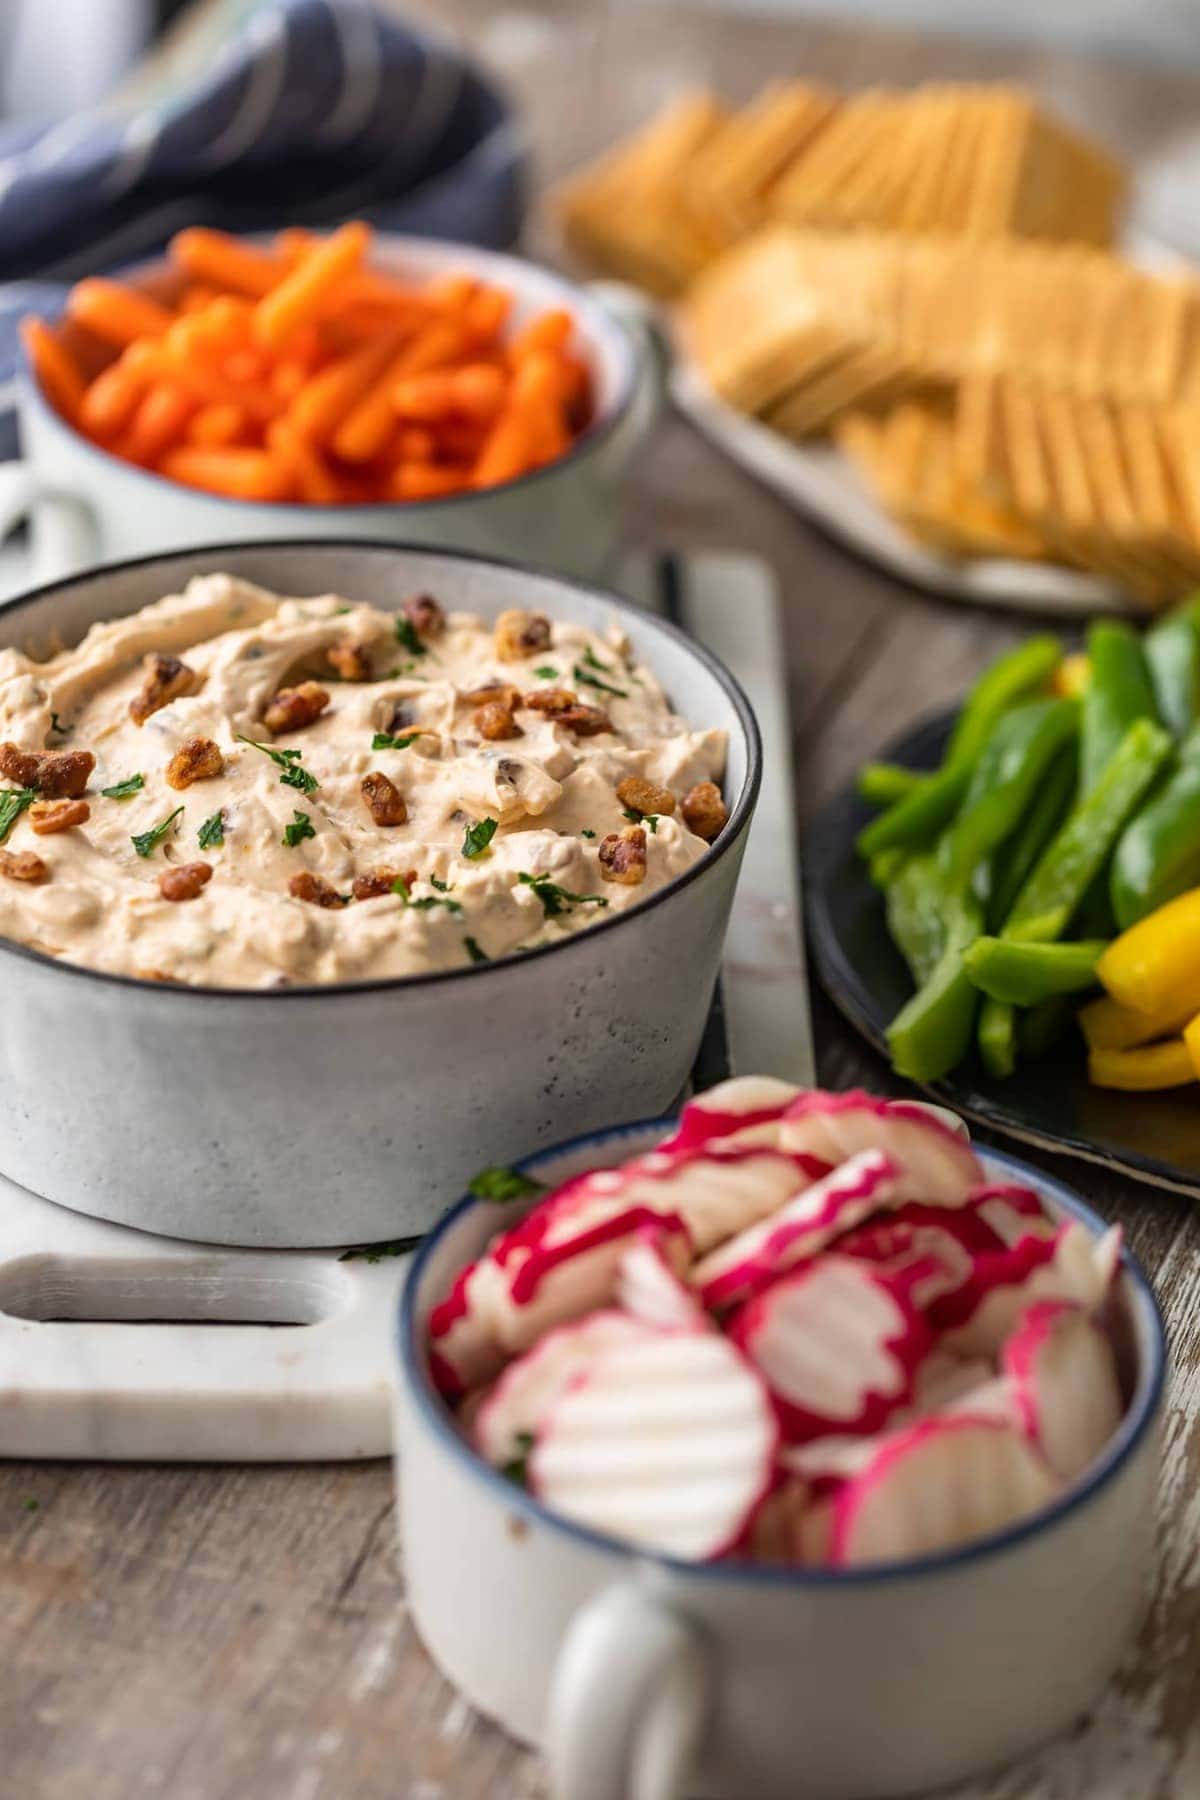 an array of bowls filled with veggies, crackers, and dips